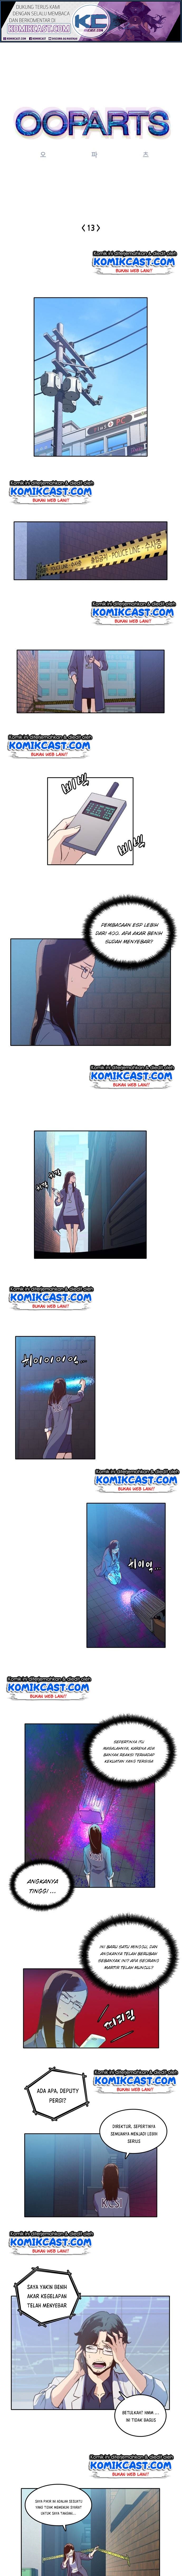 OOPARTS Chapter 13 Image 1